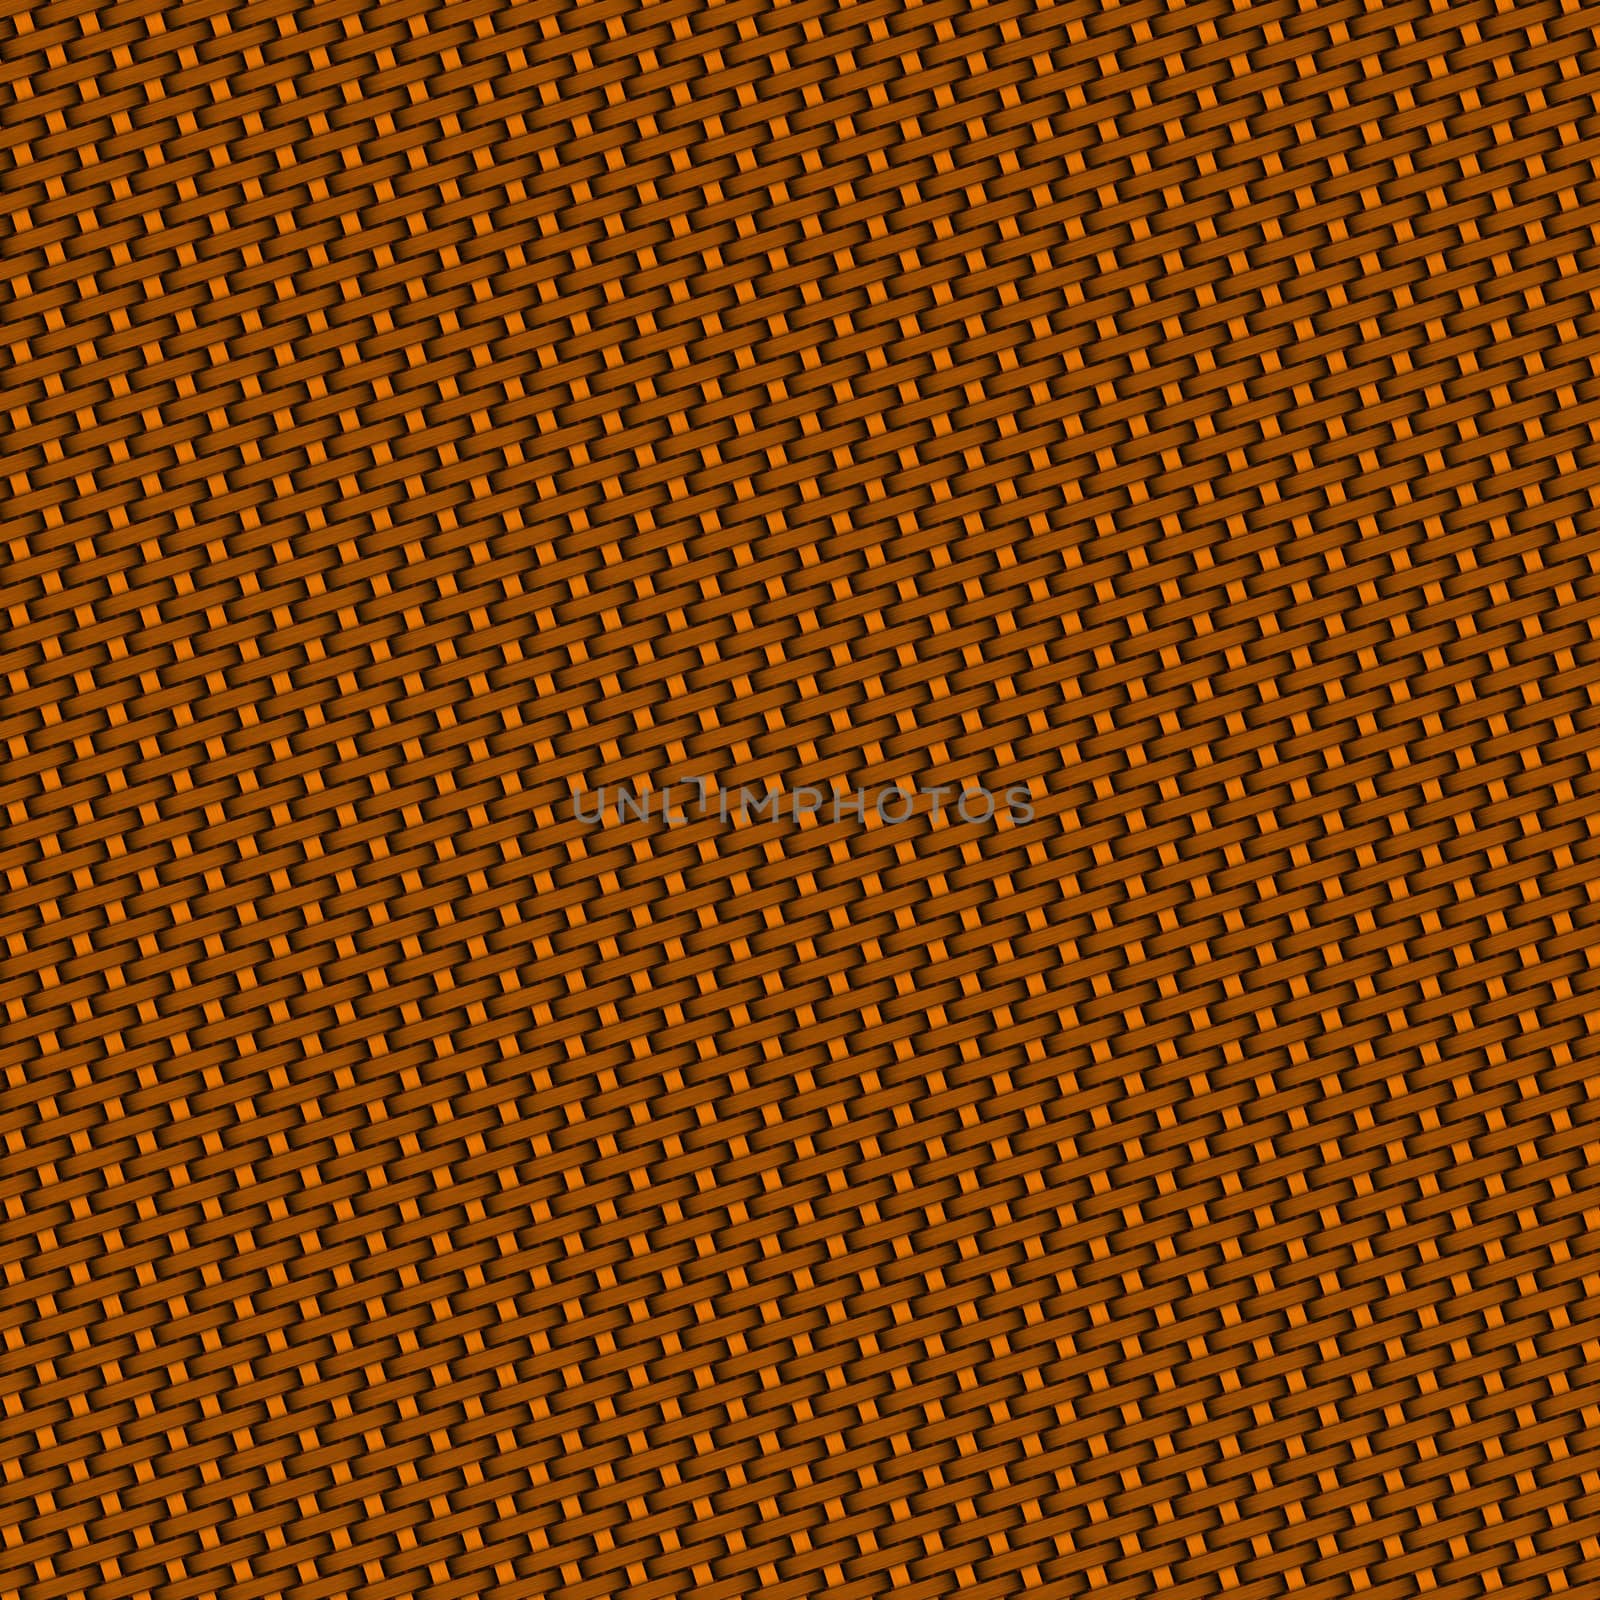 brown woven textile background